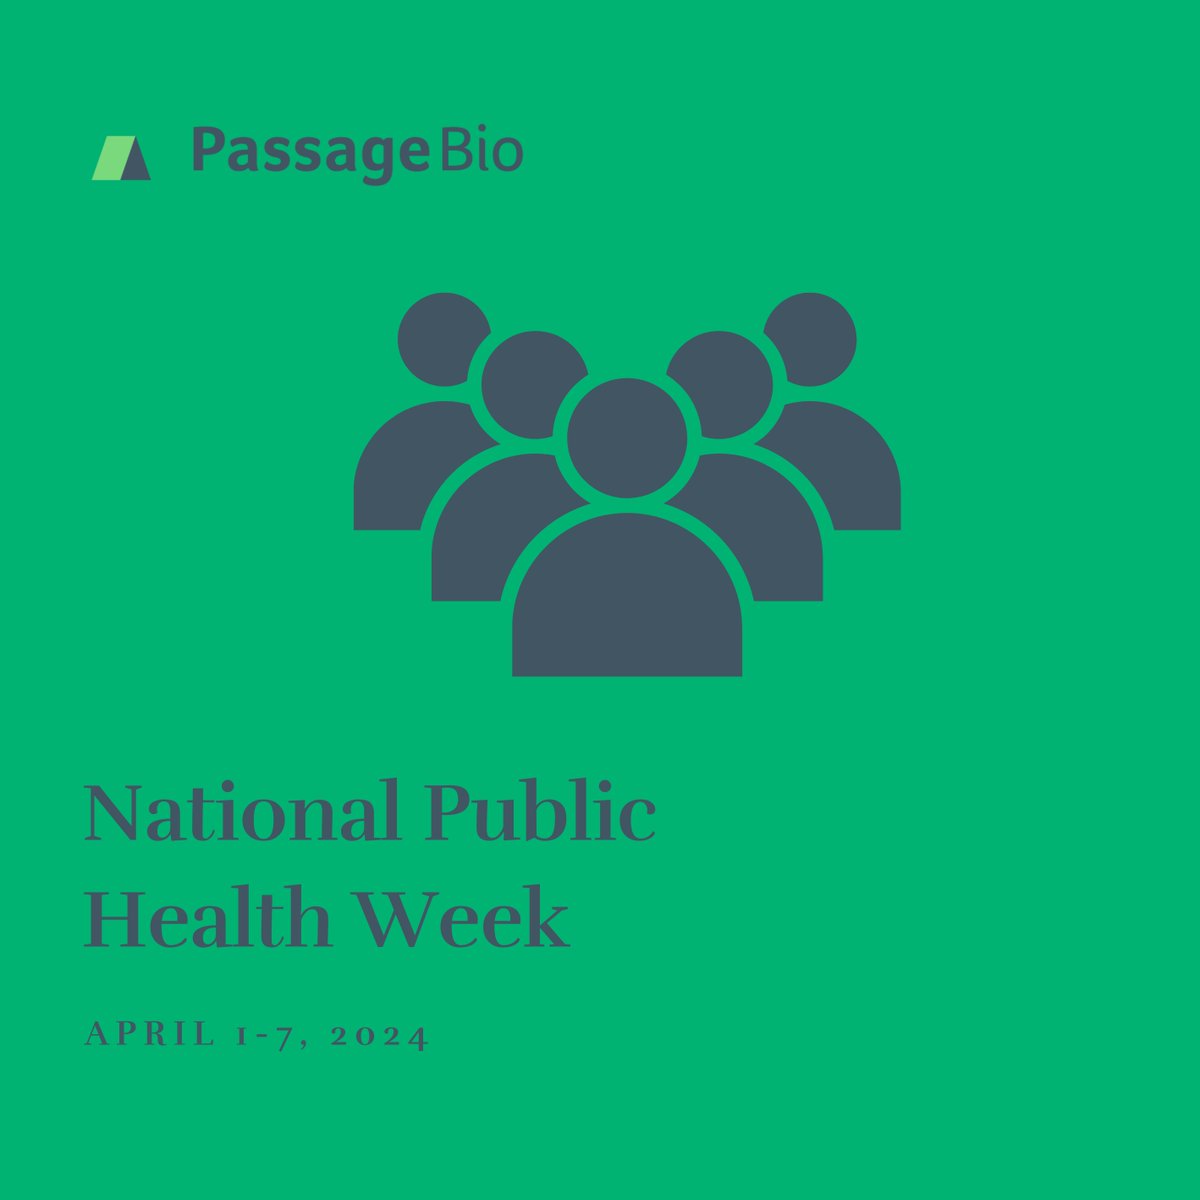 During National Public Health Week, Passage Bio encourages organizations, healthcare professionals, and individuals around the globe to come together to highlight the importance of prioritizing #publichealth. Learn how you can make a difference: loom.ly/h6h9K6E #NPHW